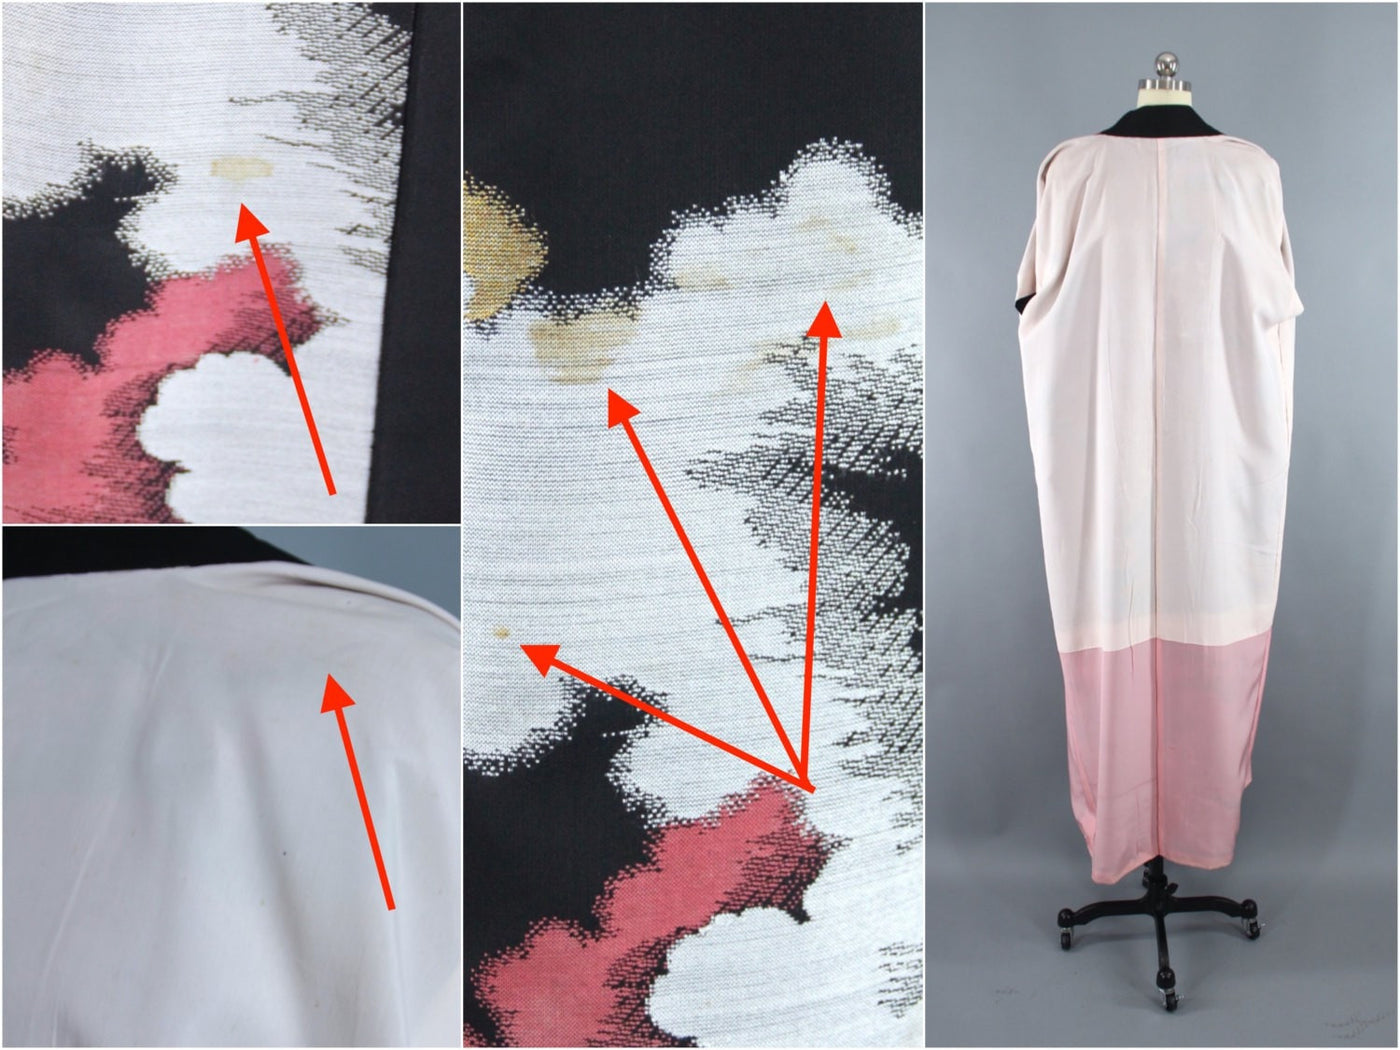 1950s Vintage Kimono Robe with Black and Pink Clouds - ThisBlueBird